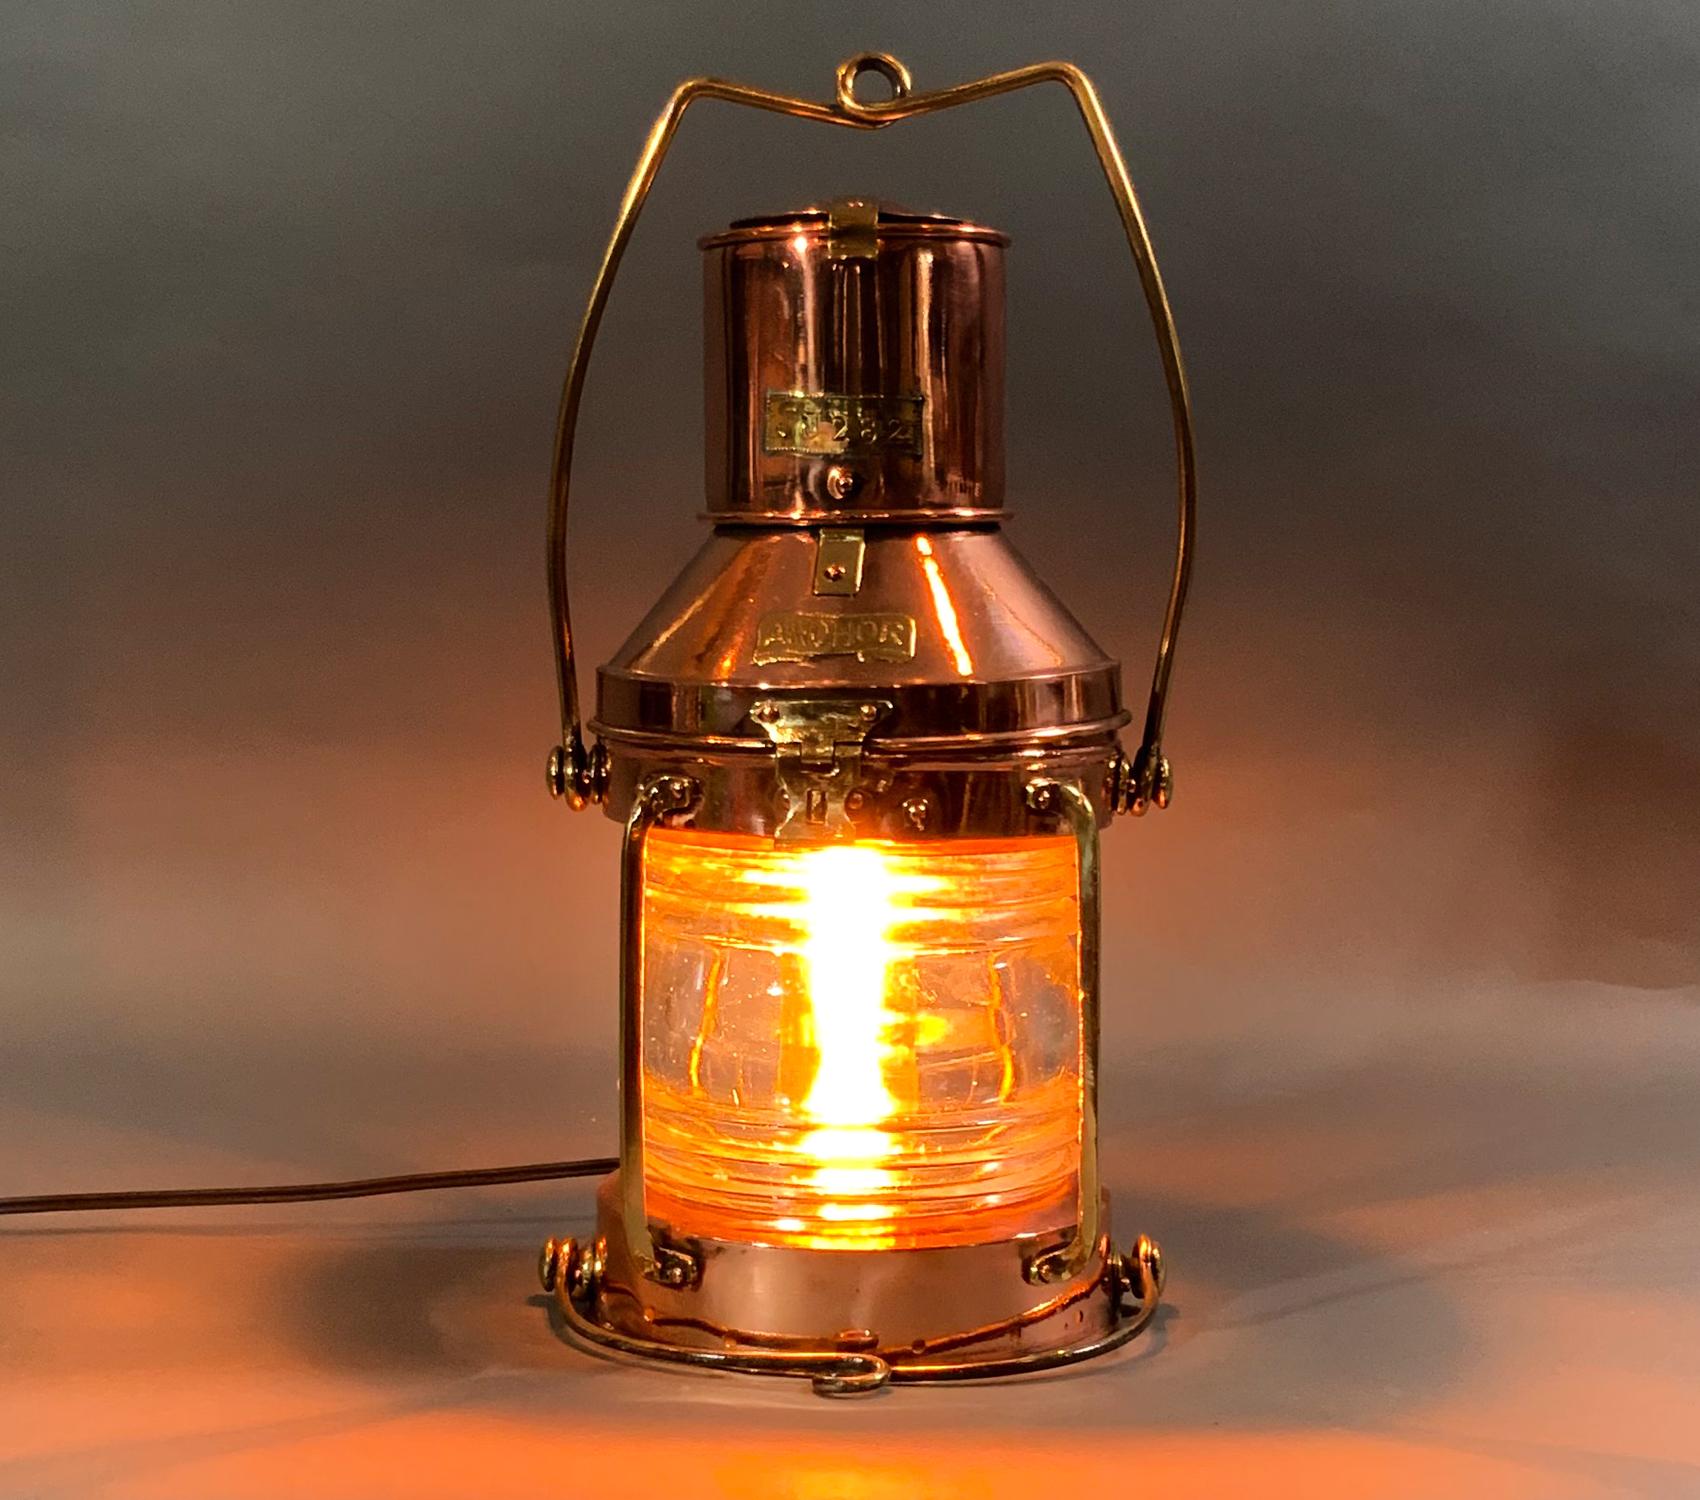 Ship lantern with solid copper case, brass trim, hoisting and bale handle, etc. Highly polished and lacquered with glass Fresnel lens. Recently rewired with a new power cord for home use. Brass makers badges. 

Weight: 7 LBS
Overall dimensions: